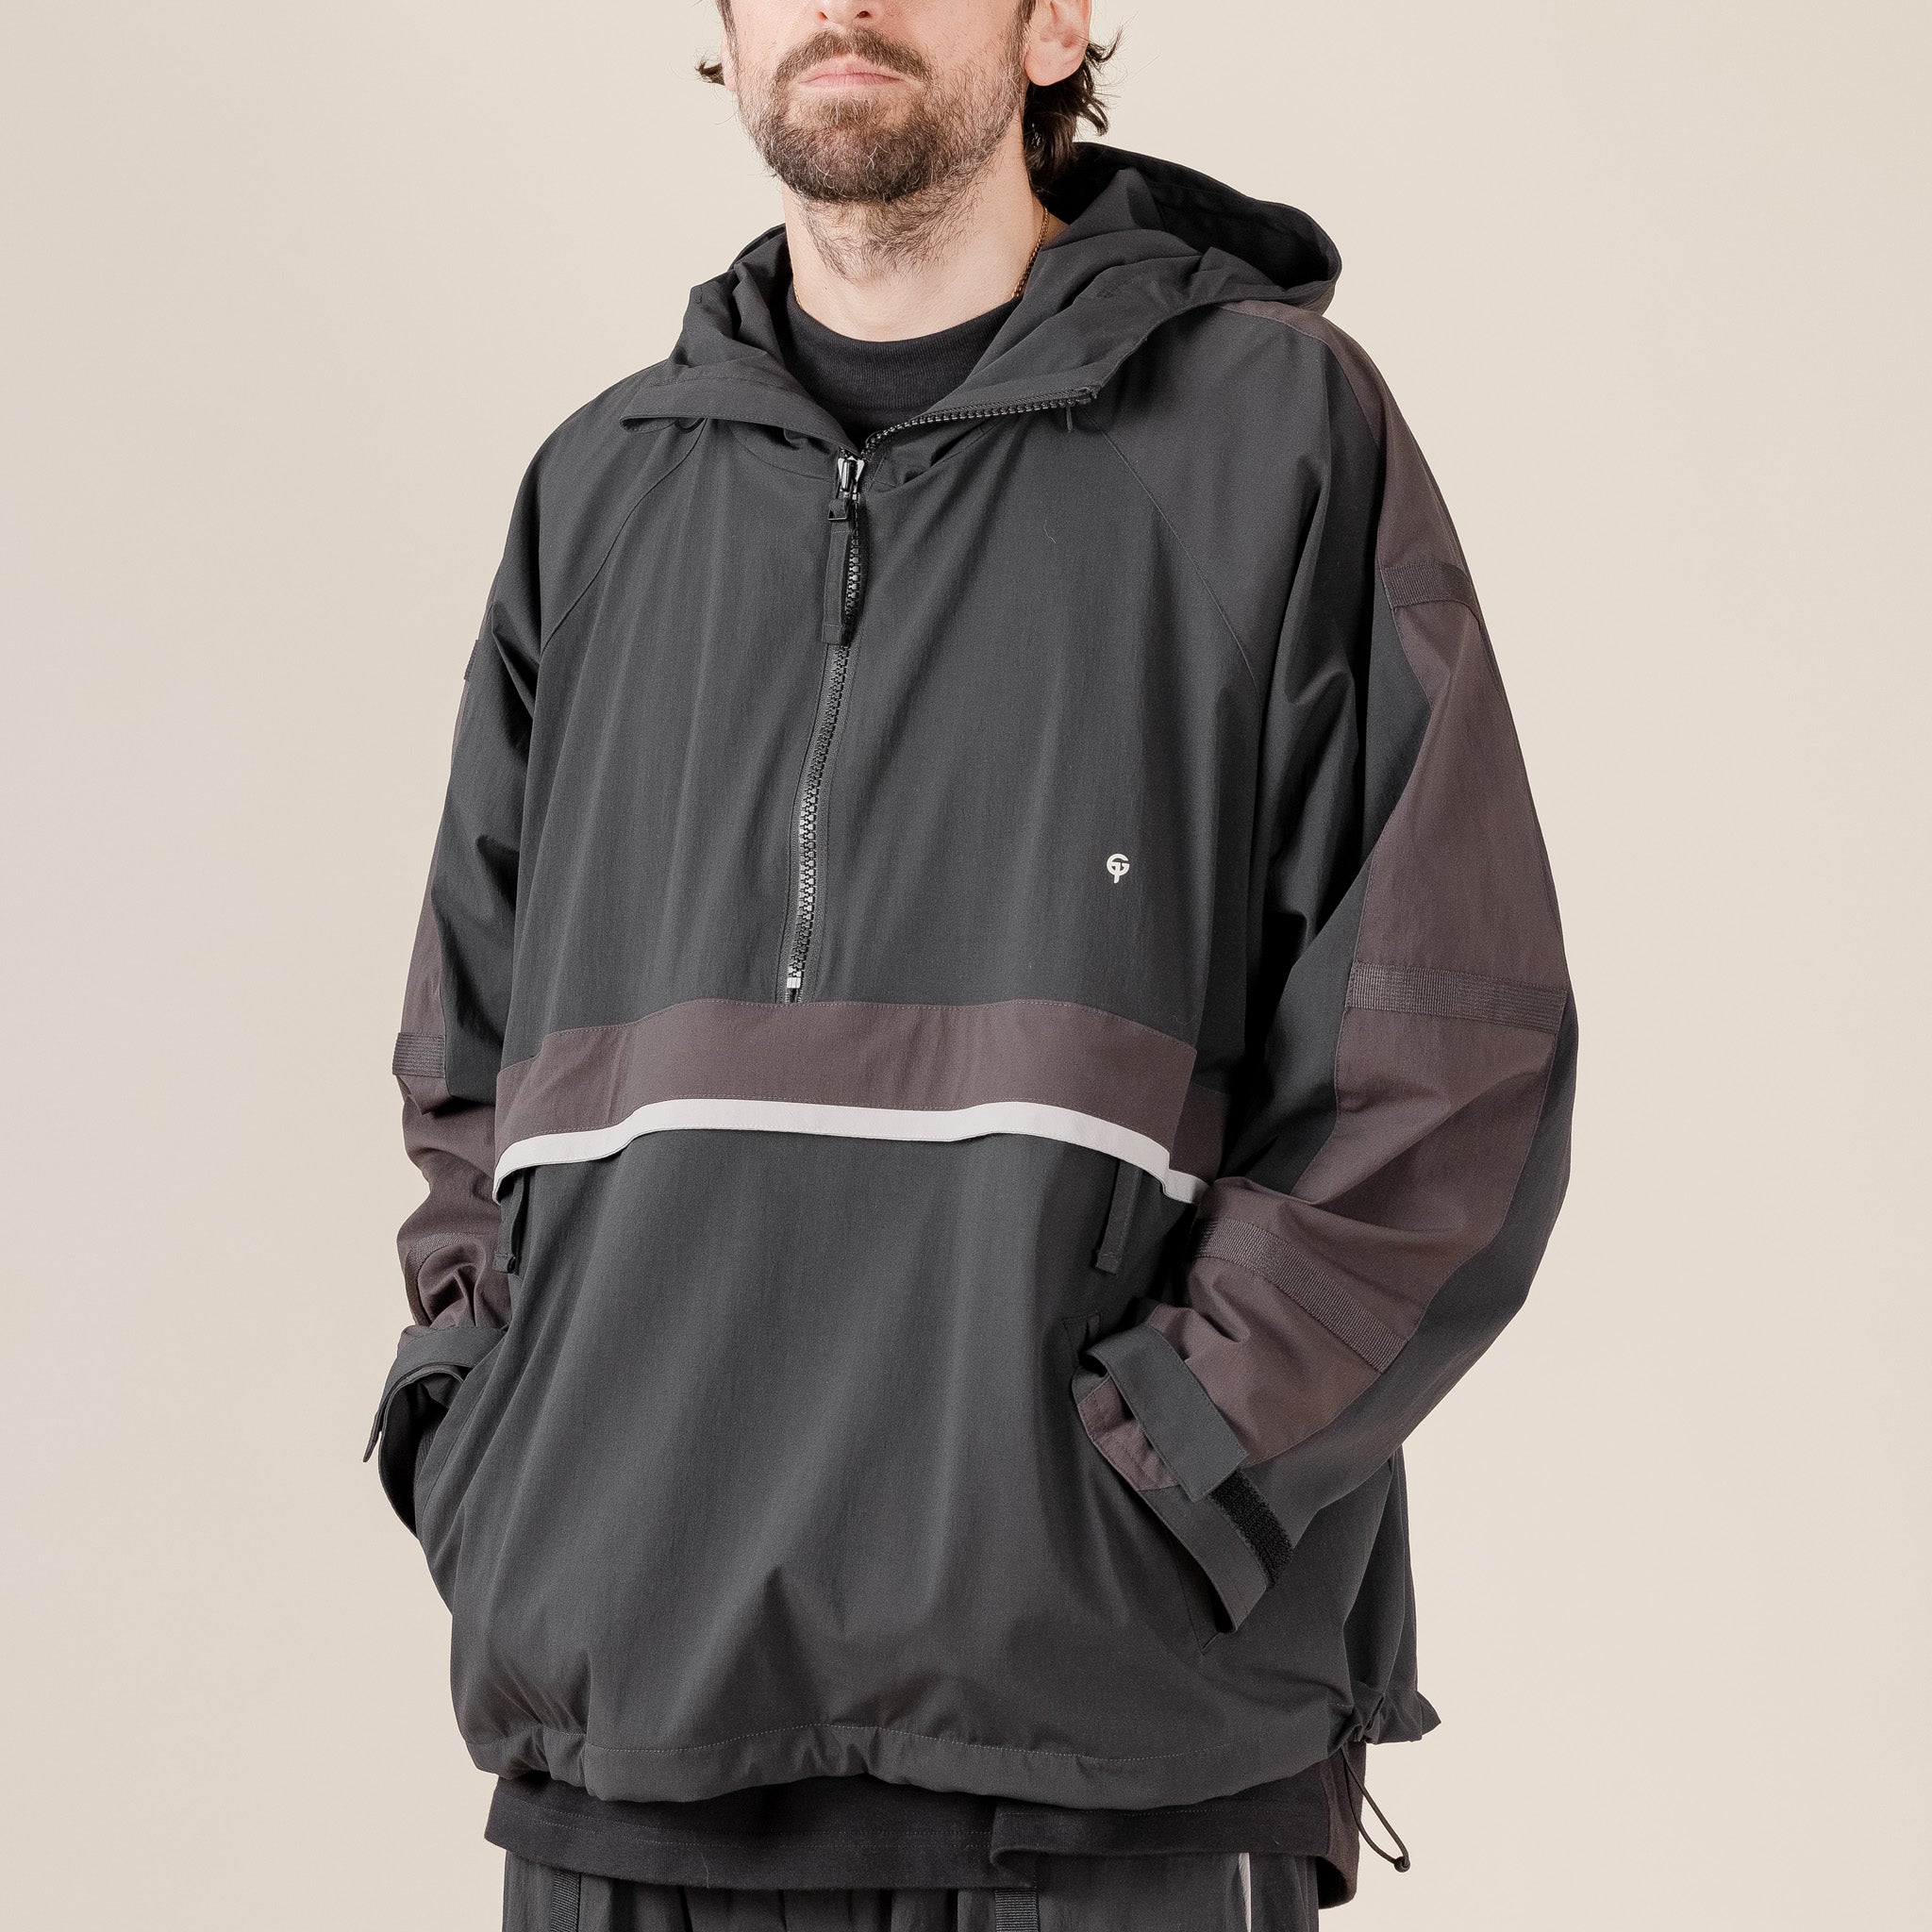 GOOPiMADE X TTOO - “Gof-A3”  Tech-Meander Pullover Jacket - Black "goopimade this thing of ours" "goopimade TTOO collaboration" 